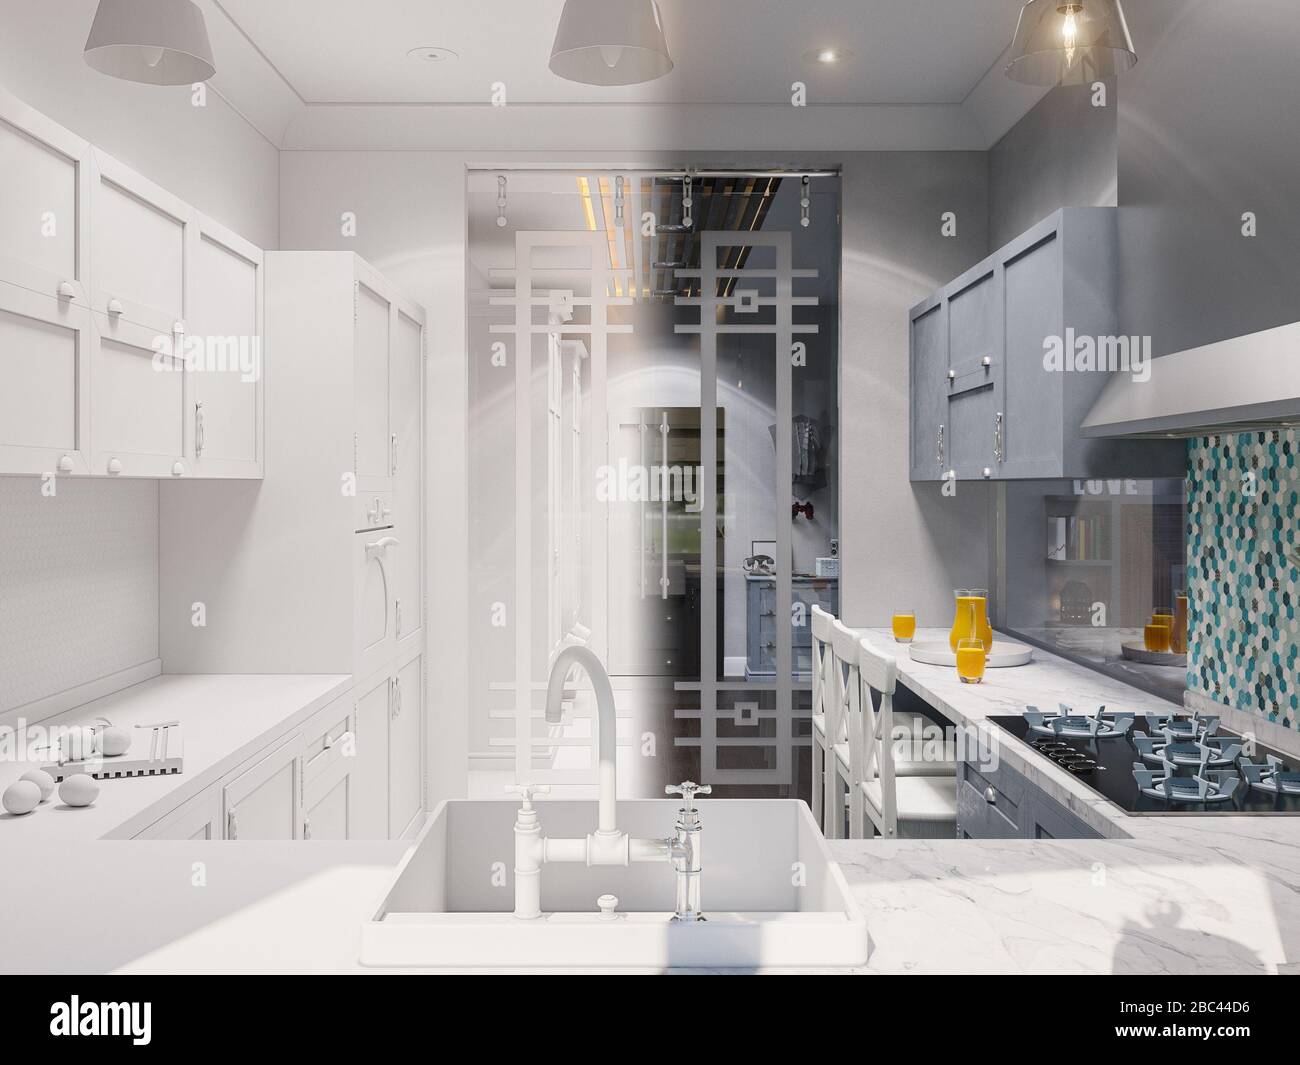 3d illustration of the interior design of the kitchen Stock Photo